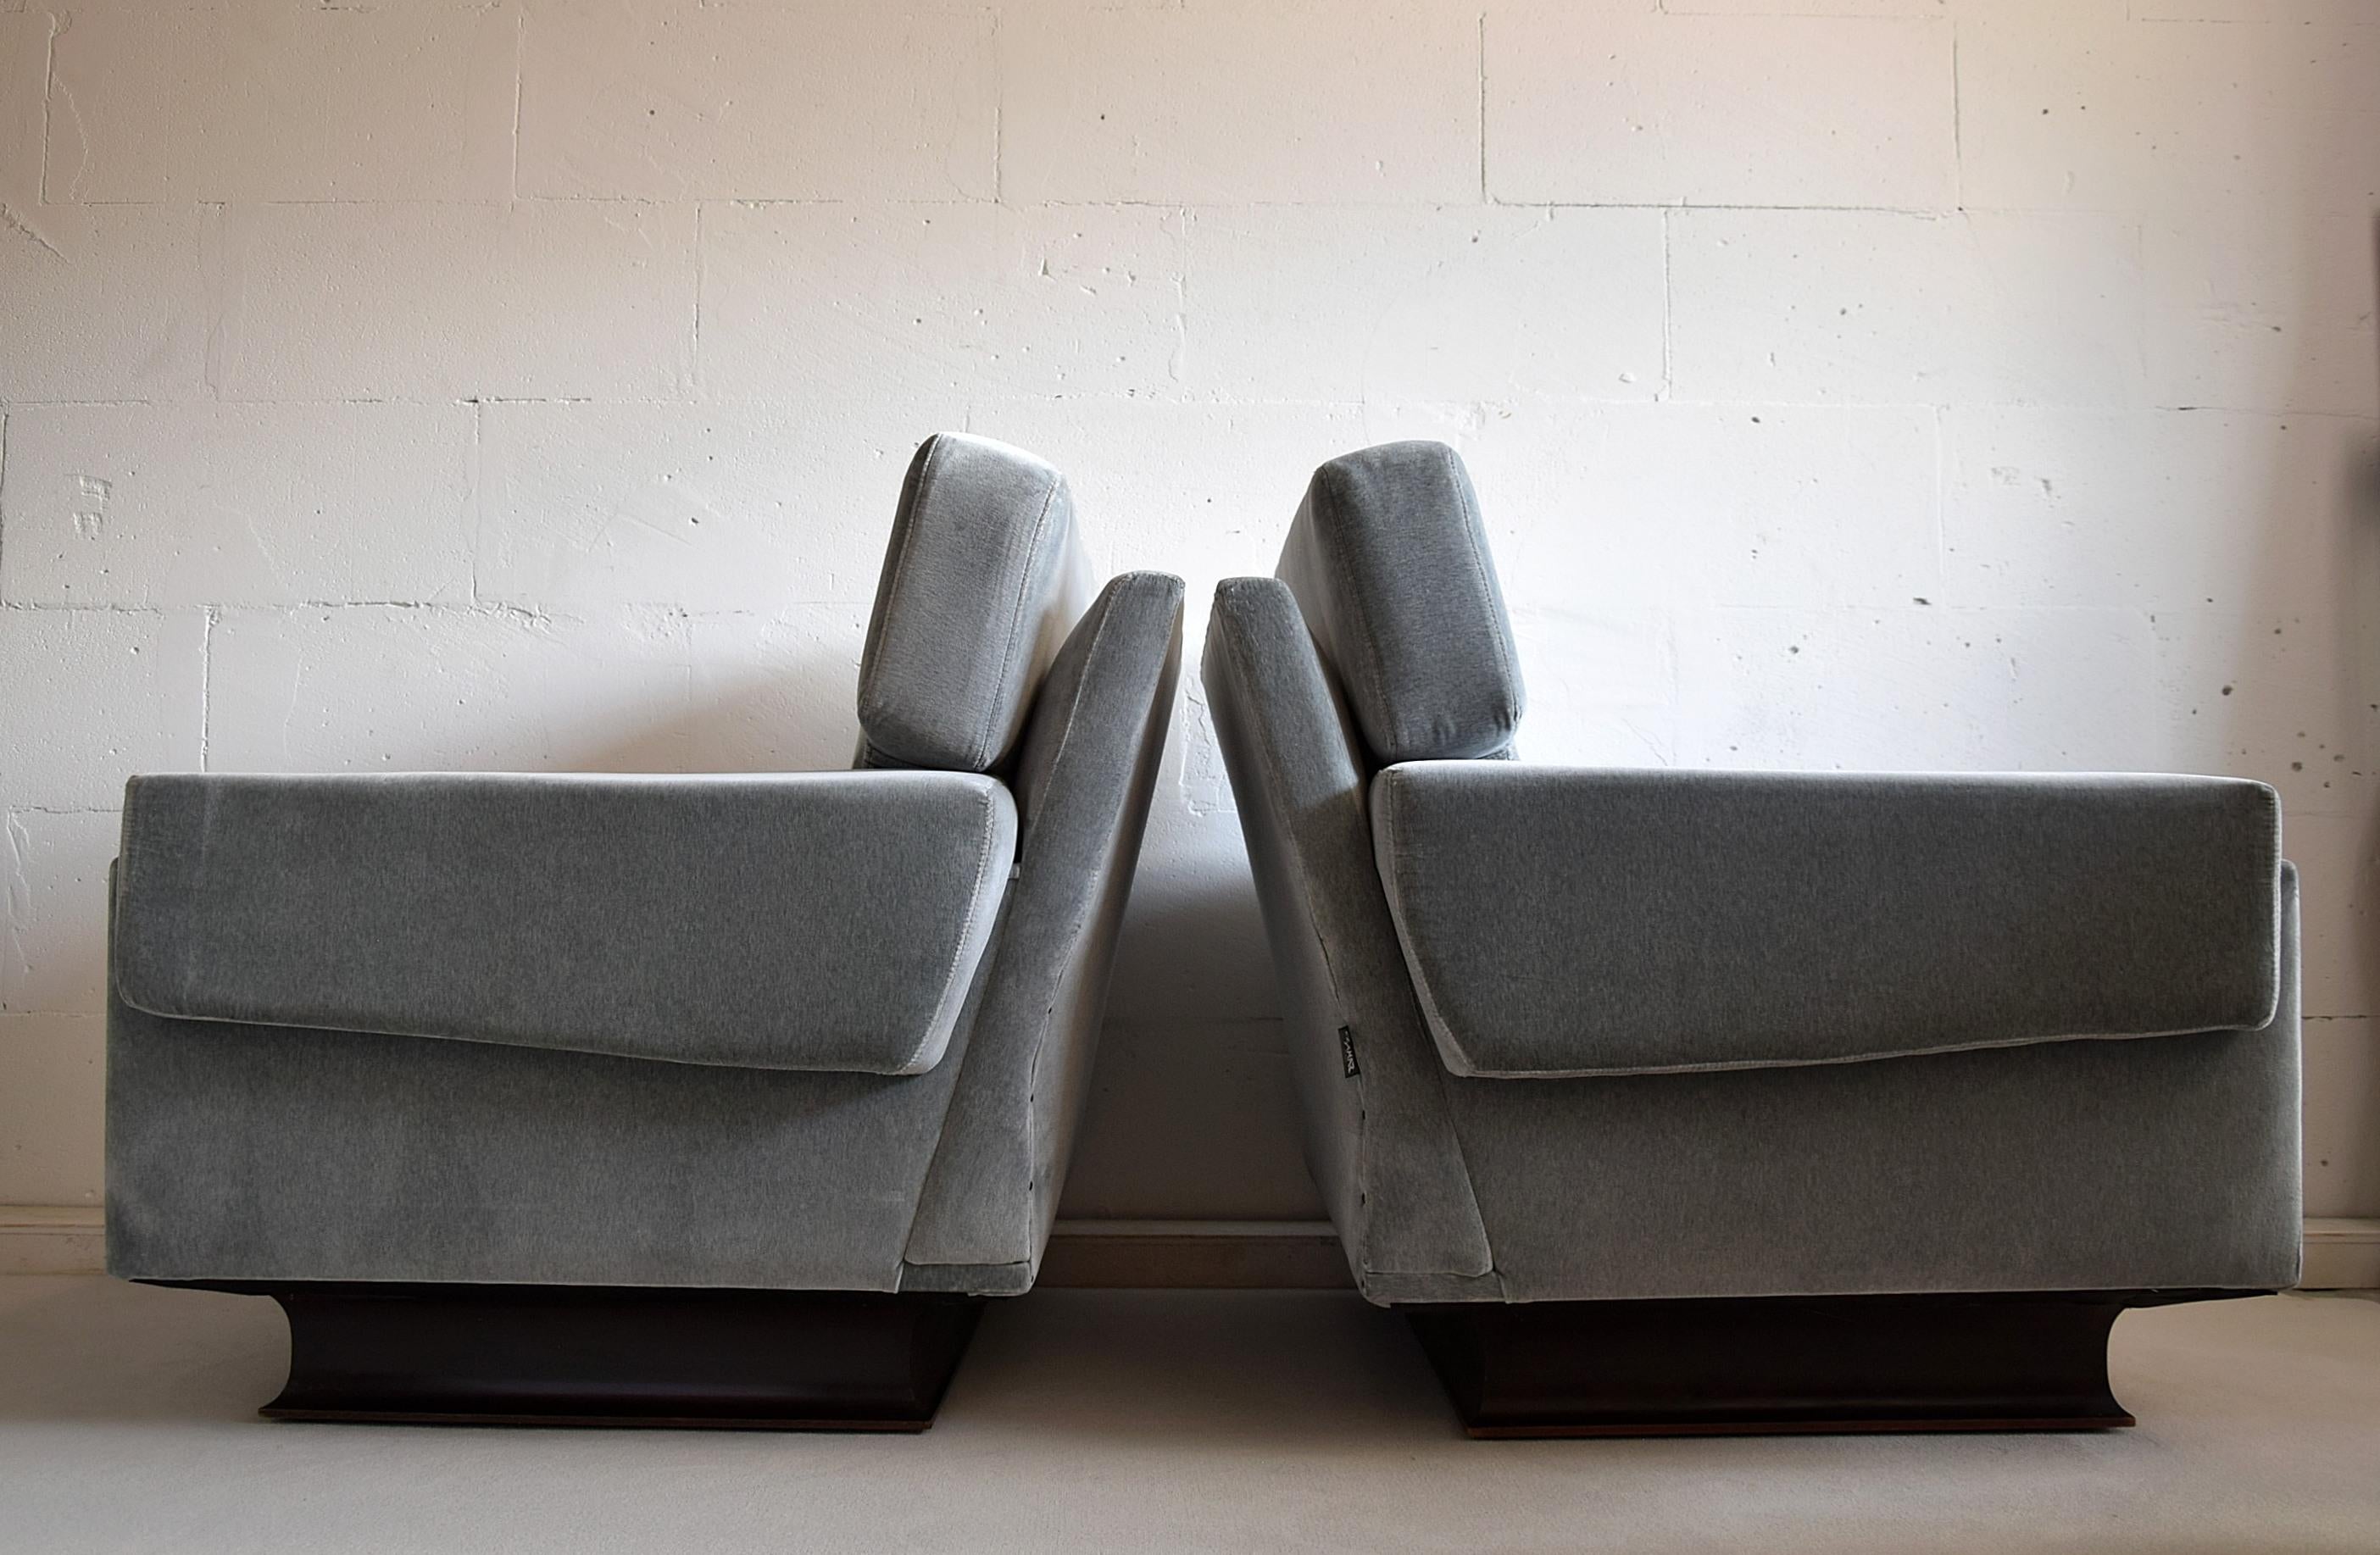 Mid-Century Modern pair of Italian re-upholstered mixed cotton and cashmere lounge chairs. Beautiful set of early 1960s cubistic grey with a hint of blue lounge chairs in great condition.
The set will be shipped insured overseas in two custom made